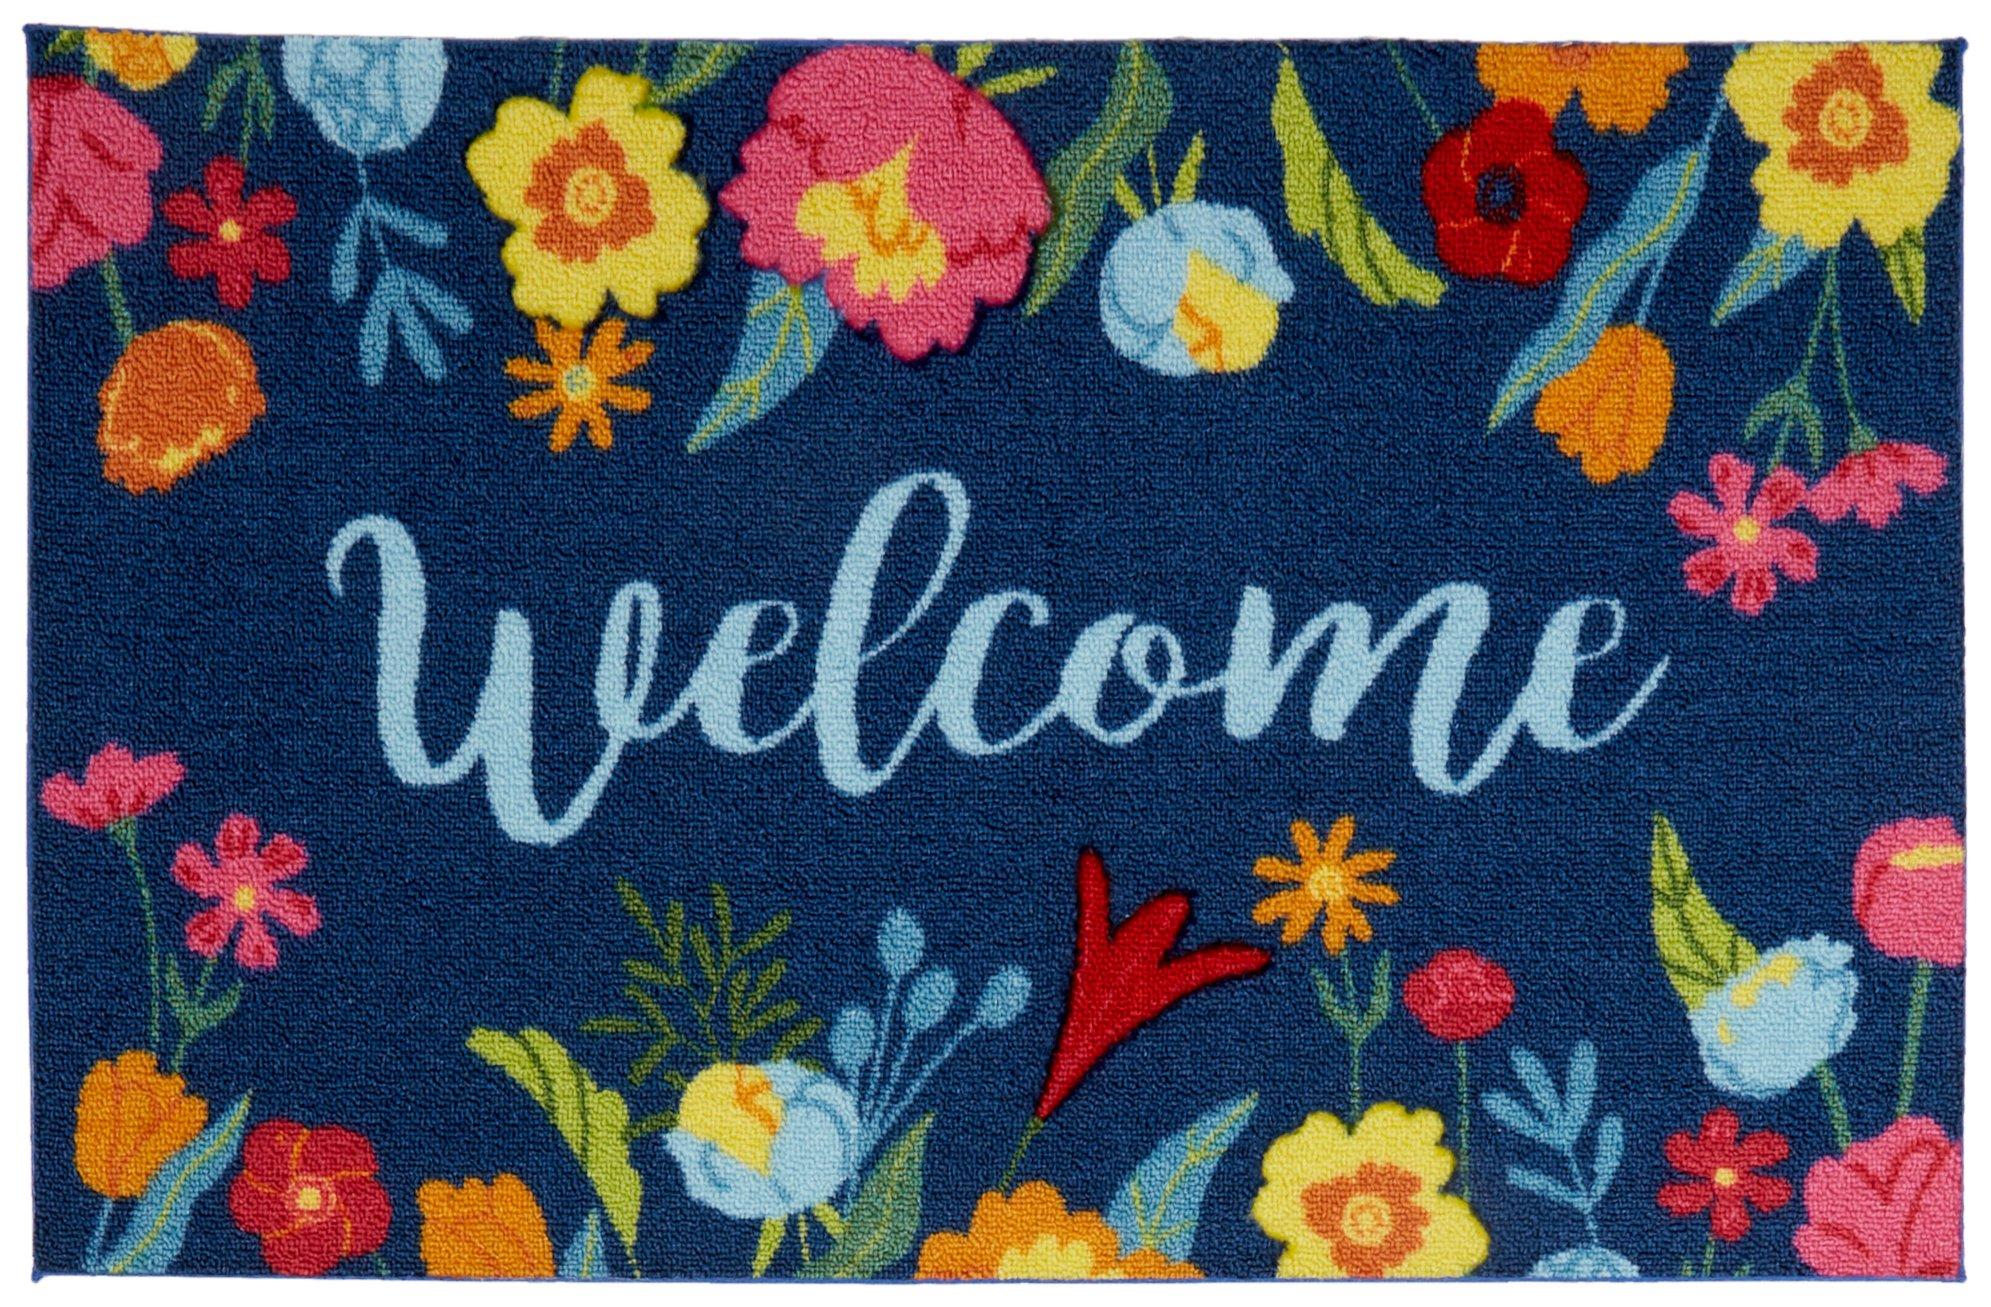 20x32 Floral Welcome Accent Rug